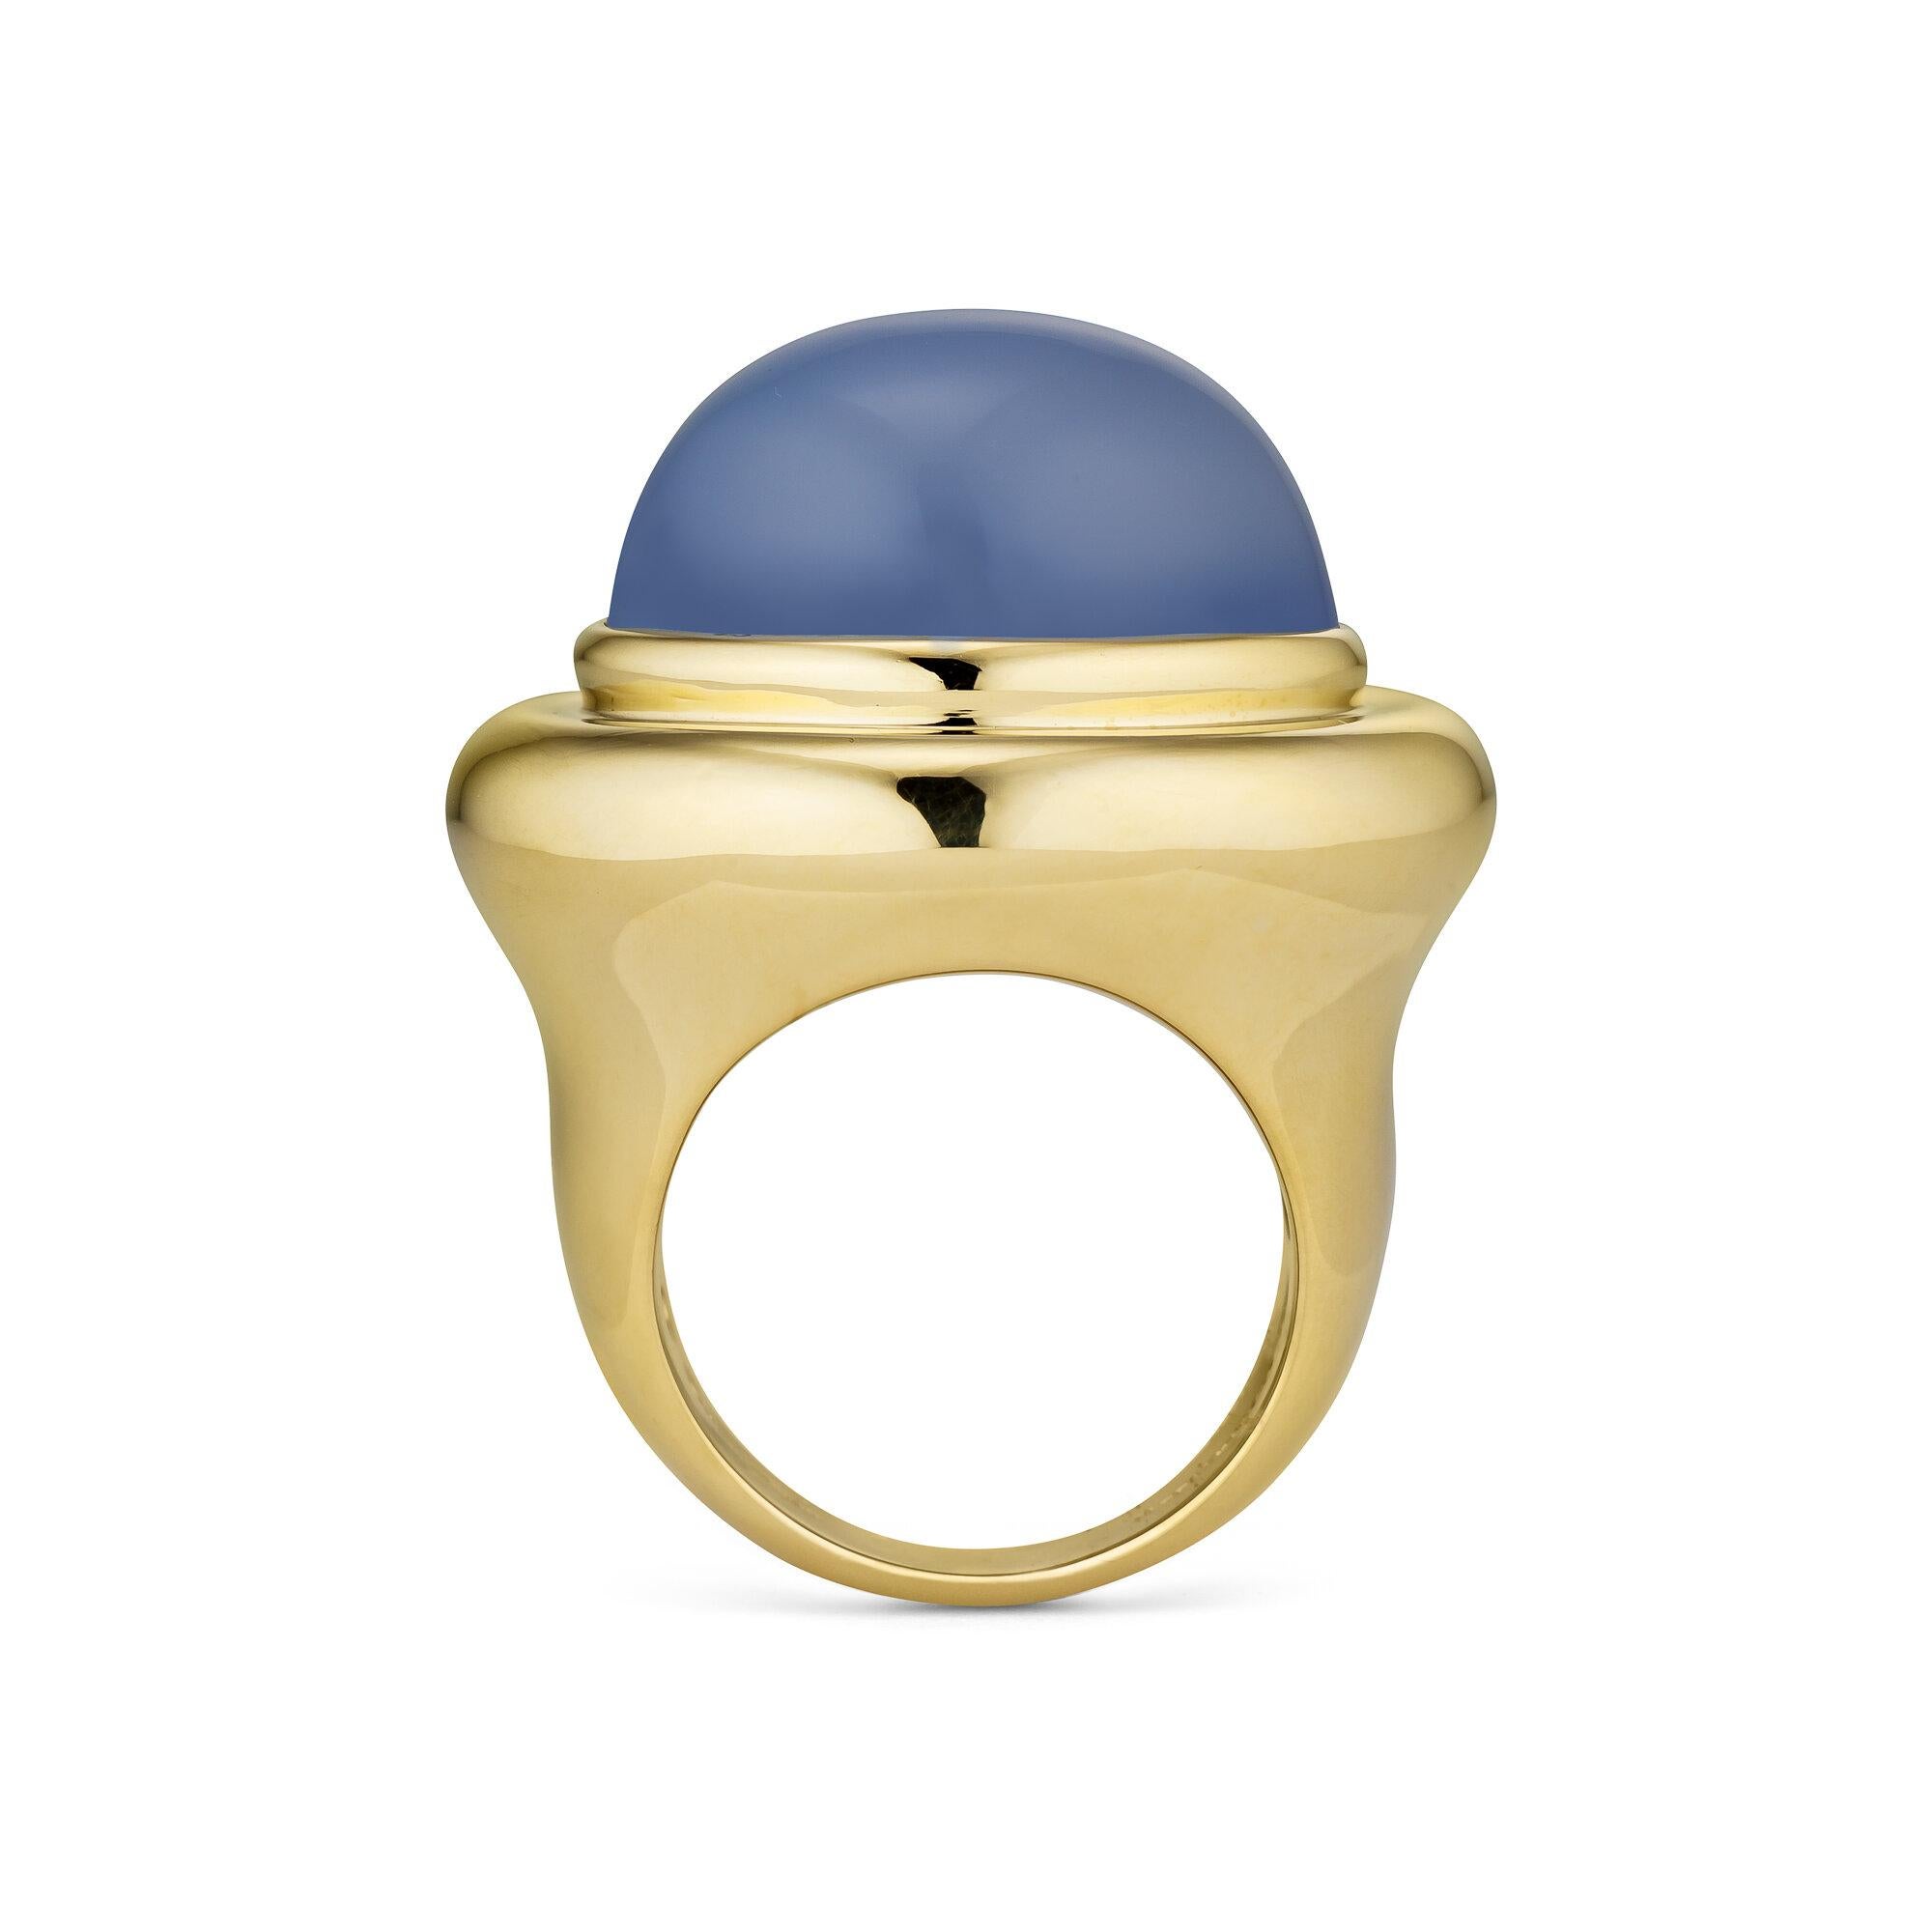 Reflective of the calming gray blue color of the moon and water, the chalcedony gemstone is known as a nurturing jewel with the energy to soothe, restore energy, and transform melancholy into joy.  And this Tiffany & Co. chalcedony vintage gold